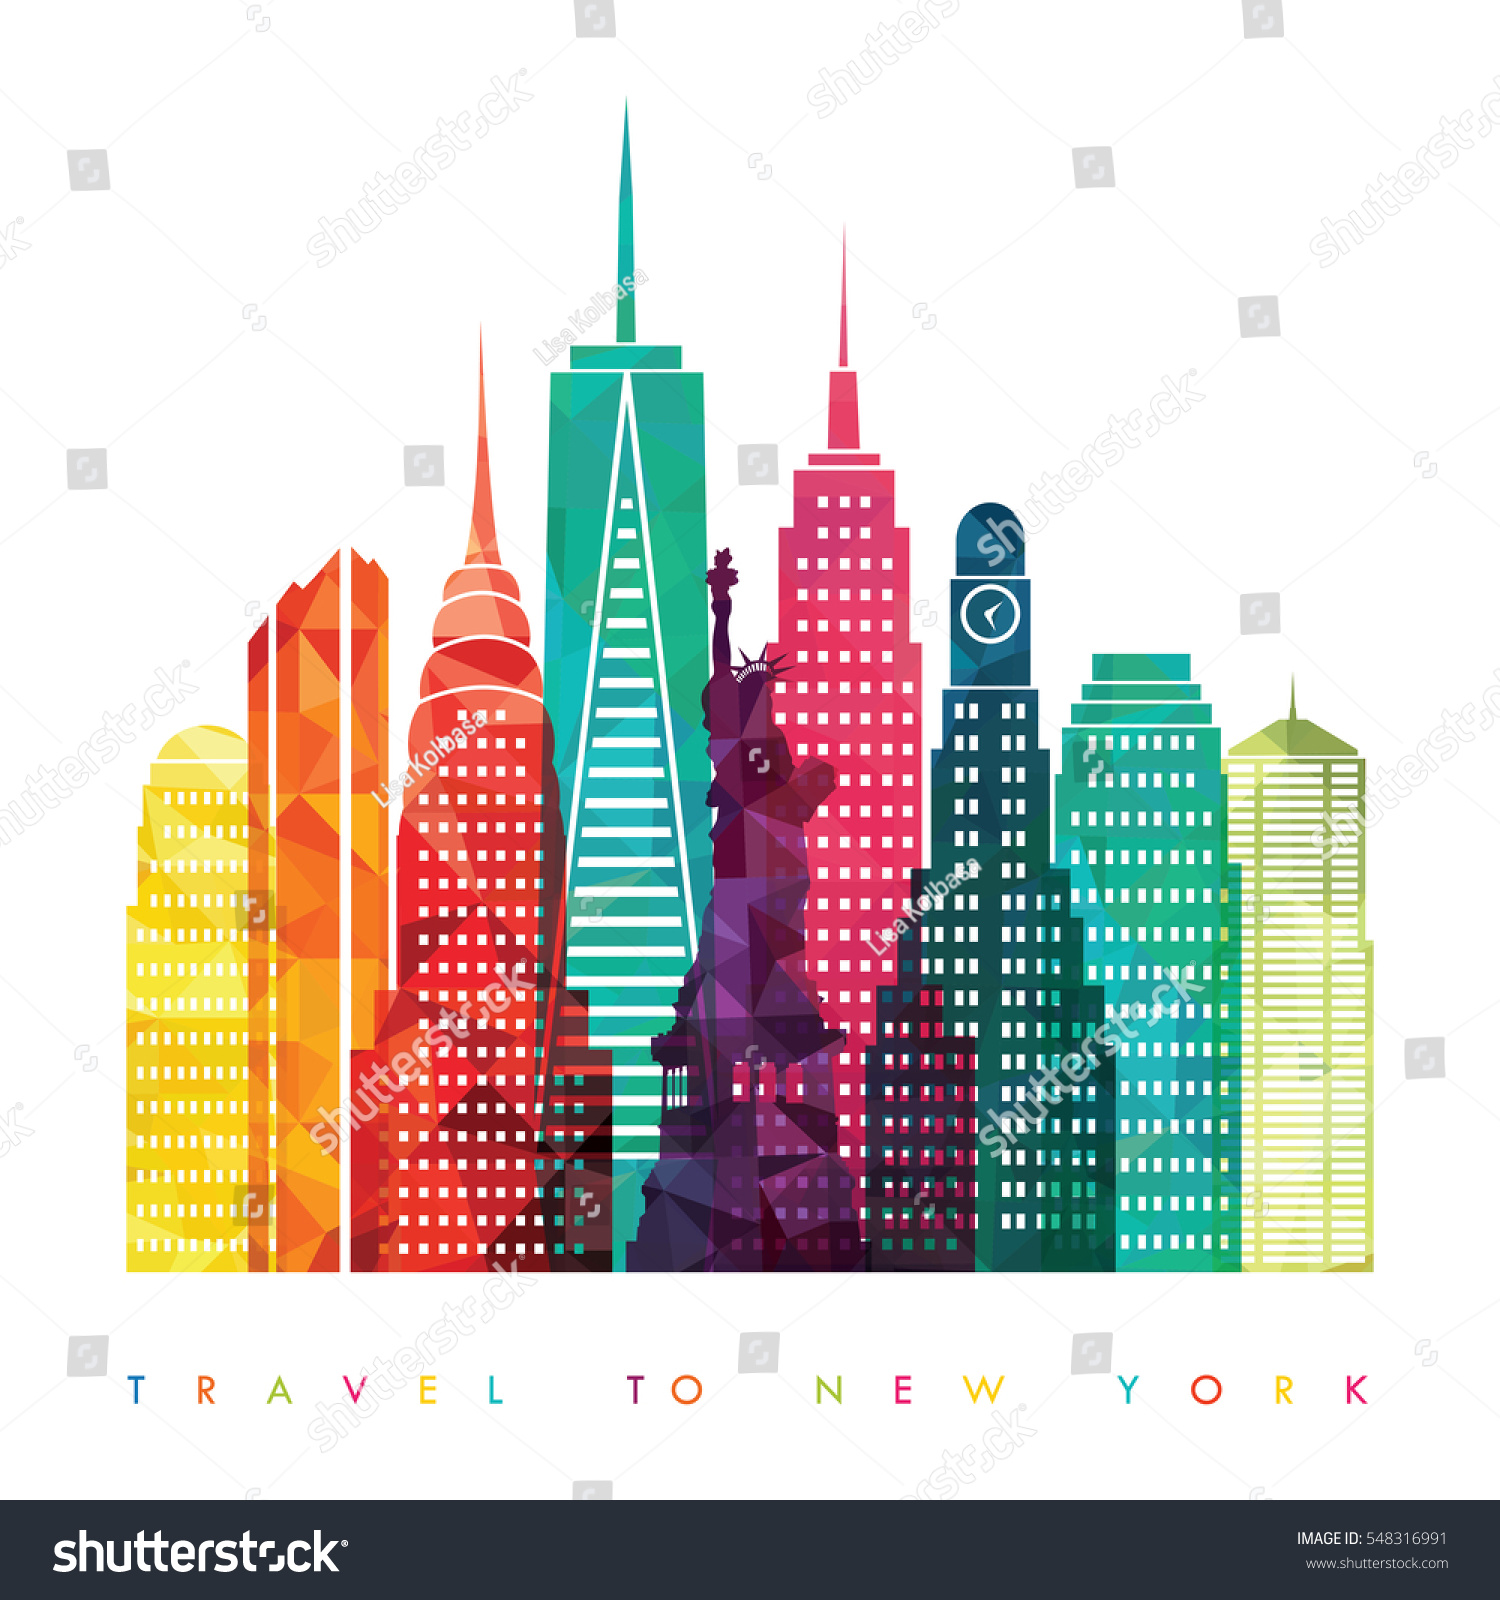 SVG of New York city, United States of America. Travel and tourism background. Vector illustration svg